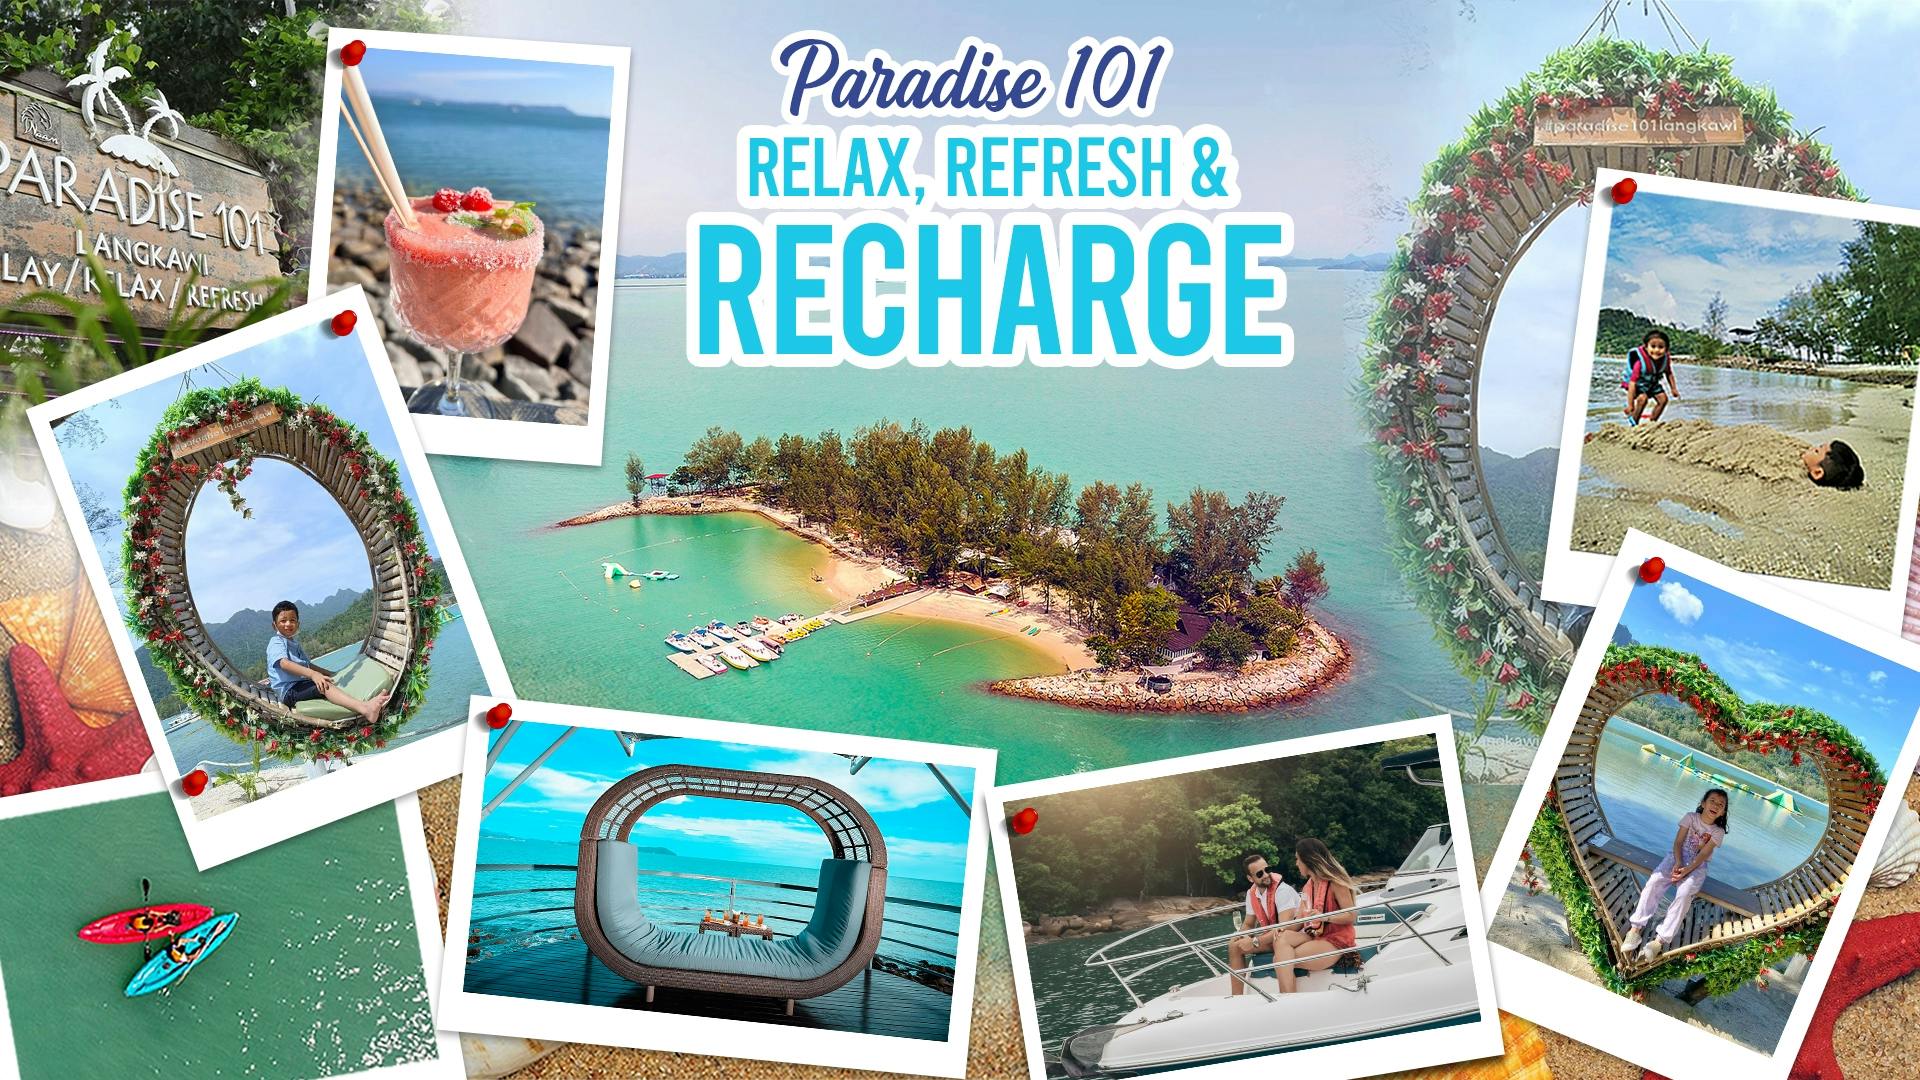 Paradise 101 relax, refresh and recharge entrance ticket